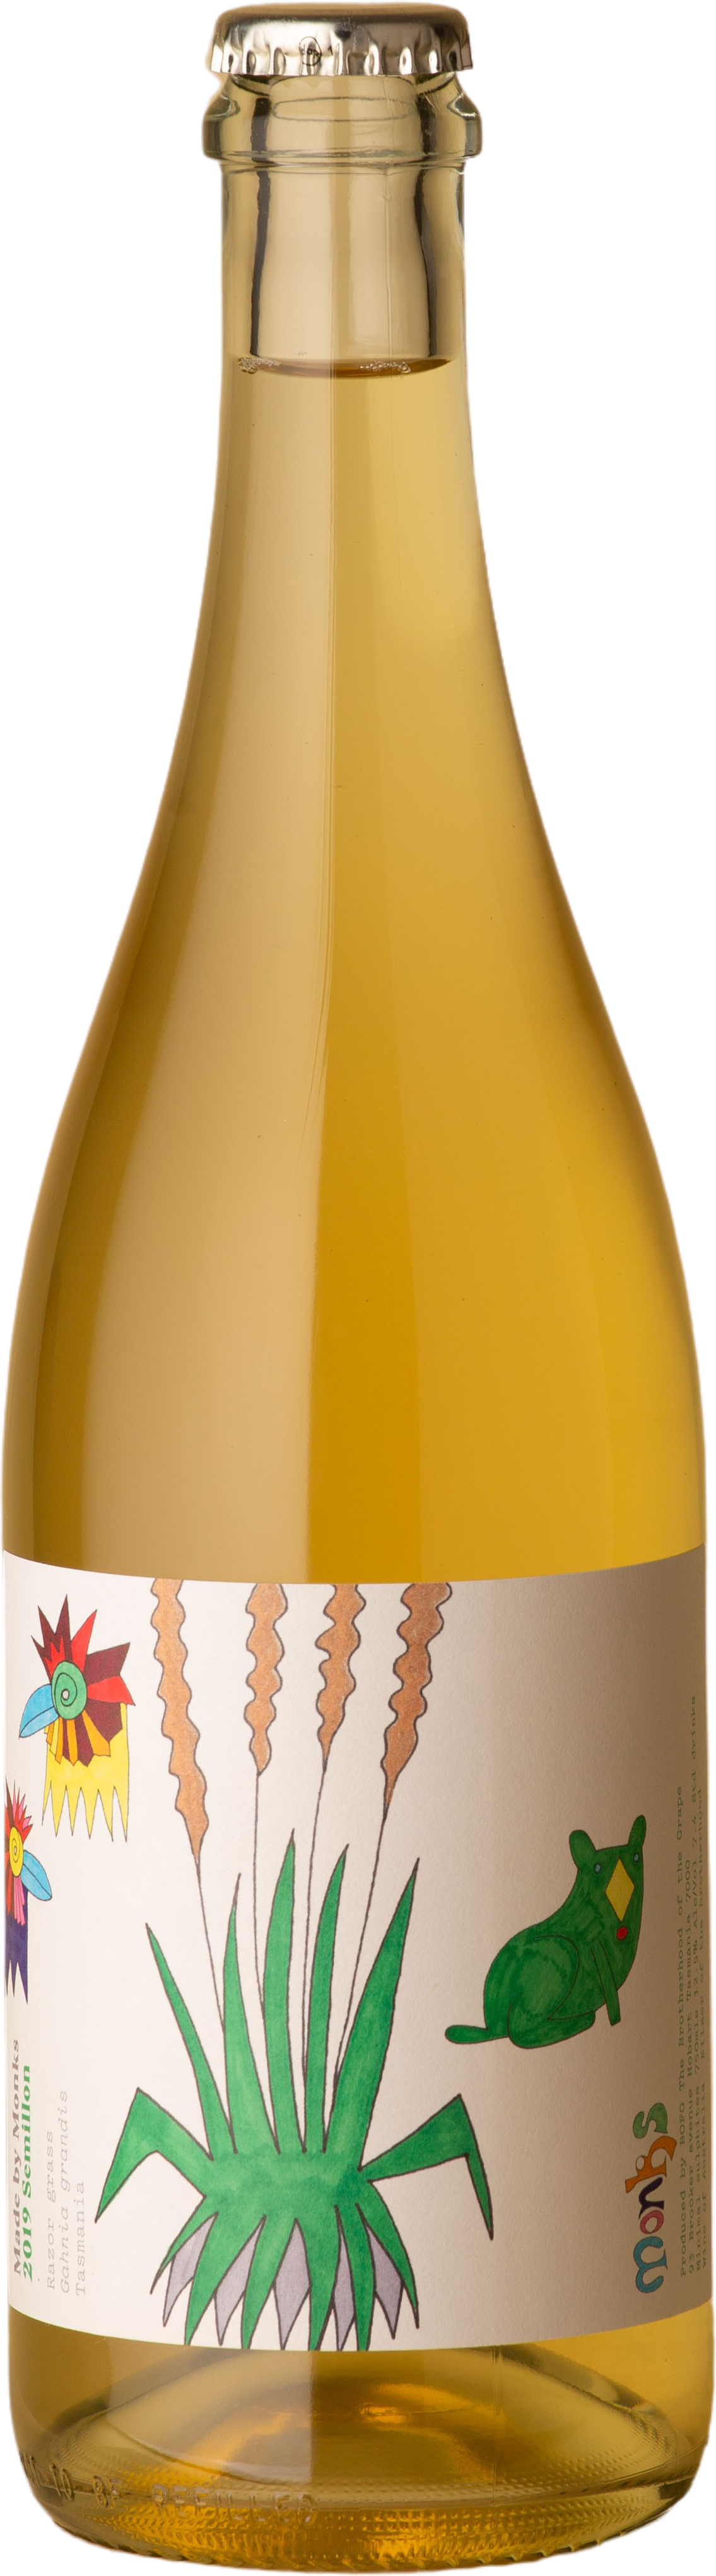 Made by Monks - Semillon 2019 White Wine